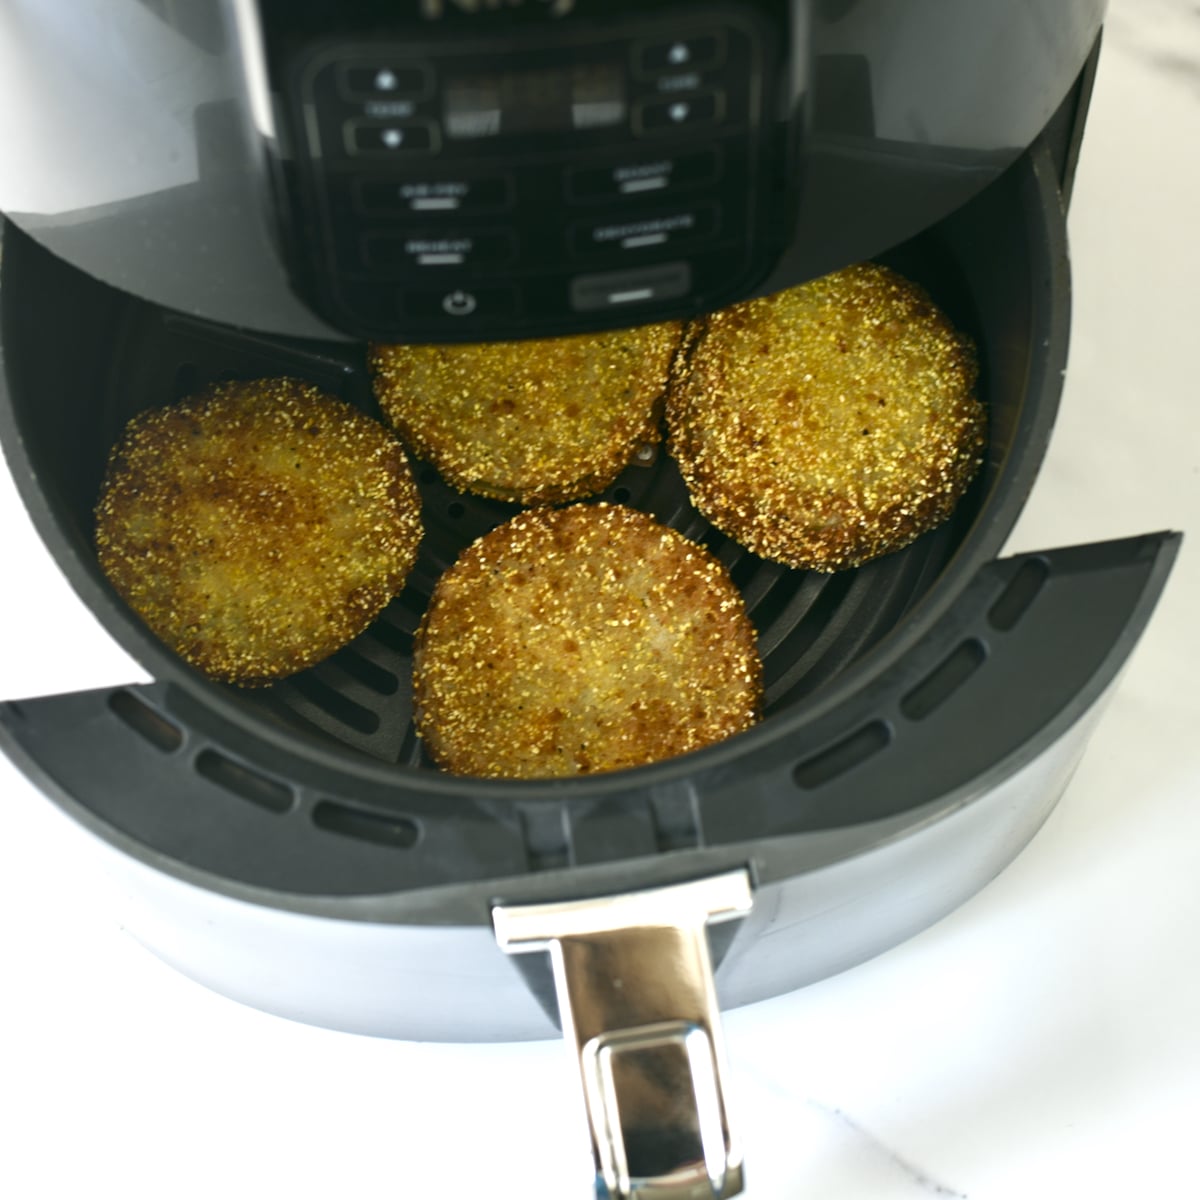 Fried green tomatoes in an open basket style air fryer.